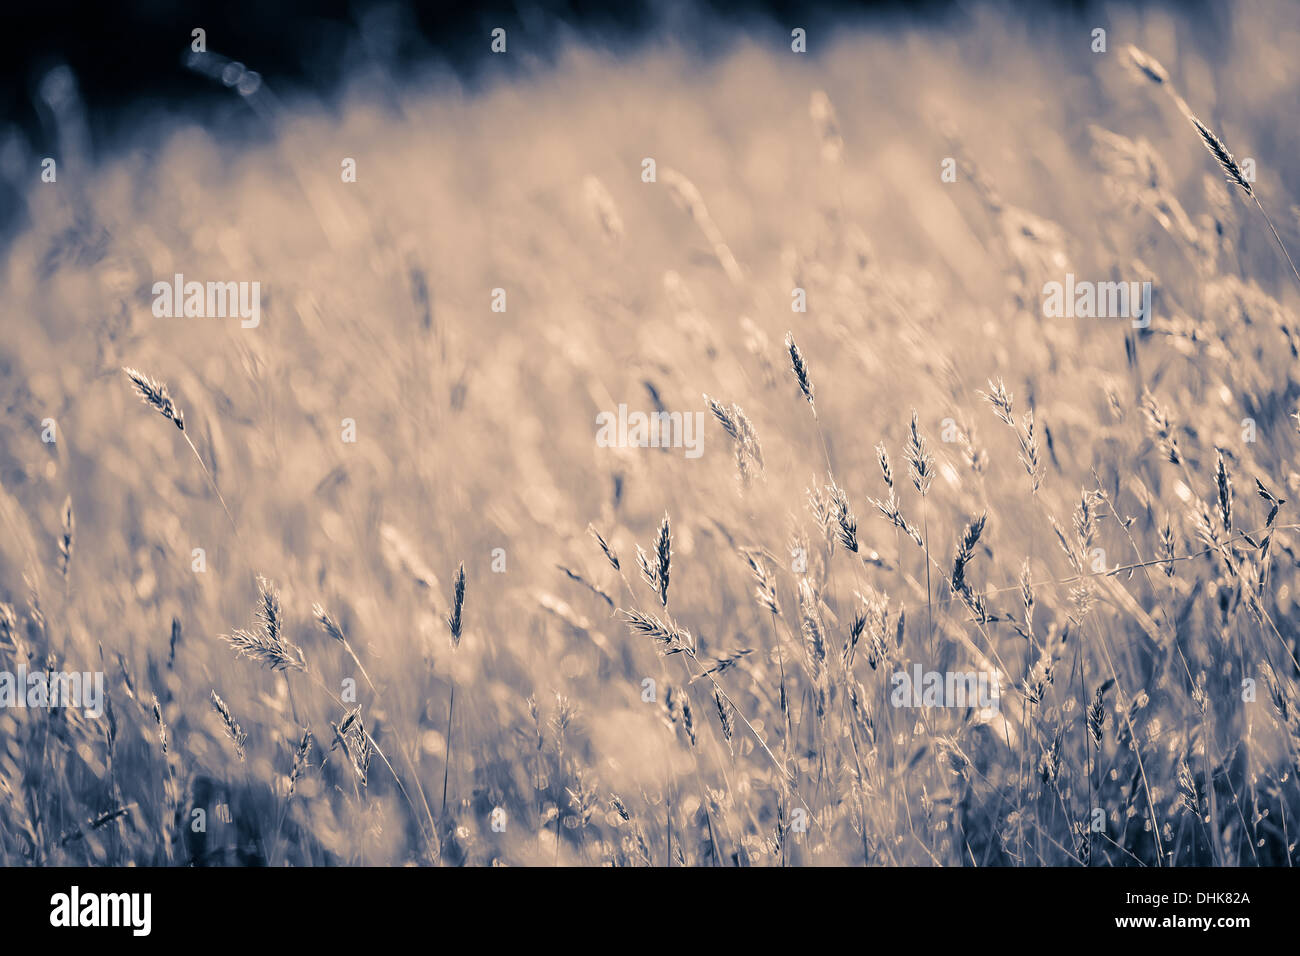 A field of long grass with the seeds in a sepia monochrome look Stock Photo